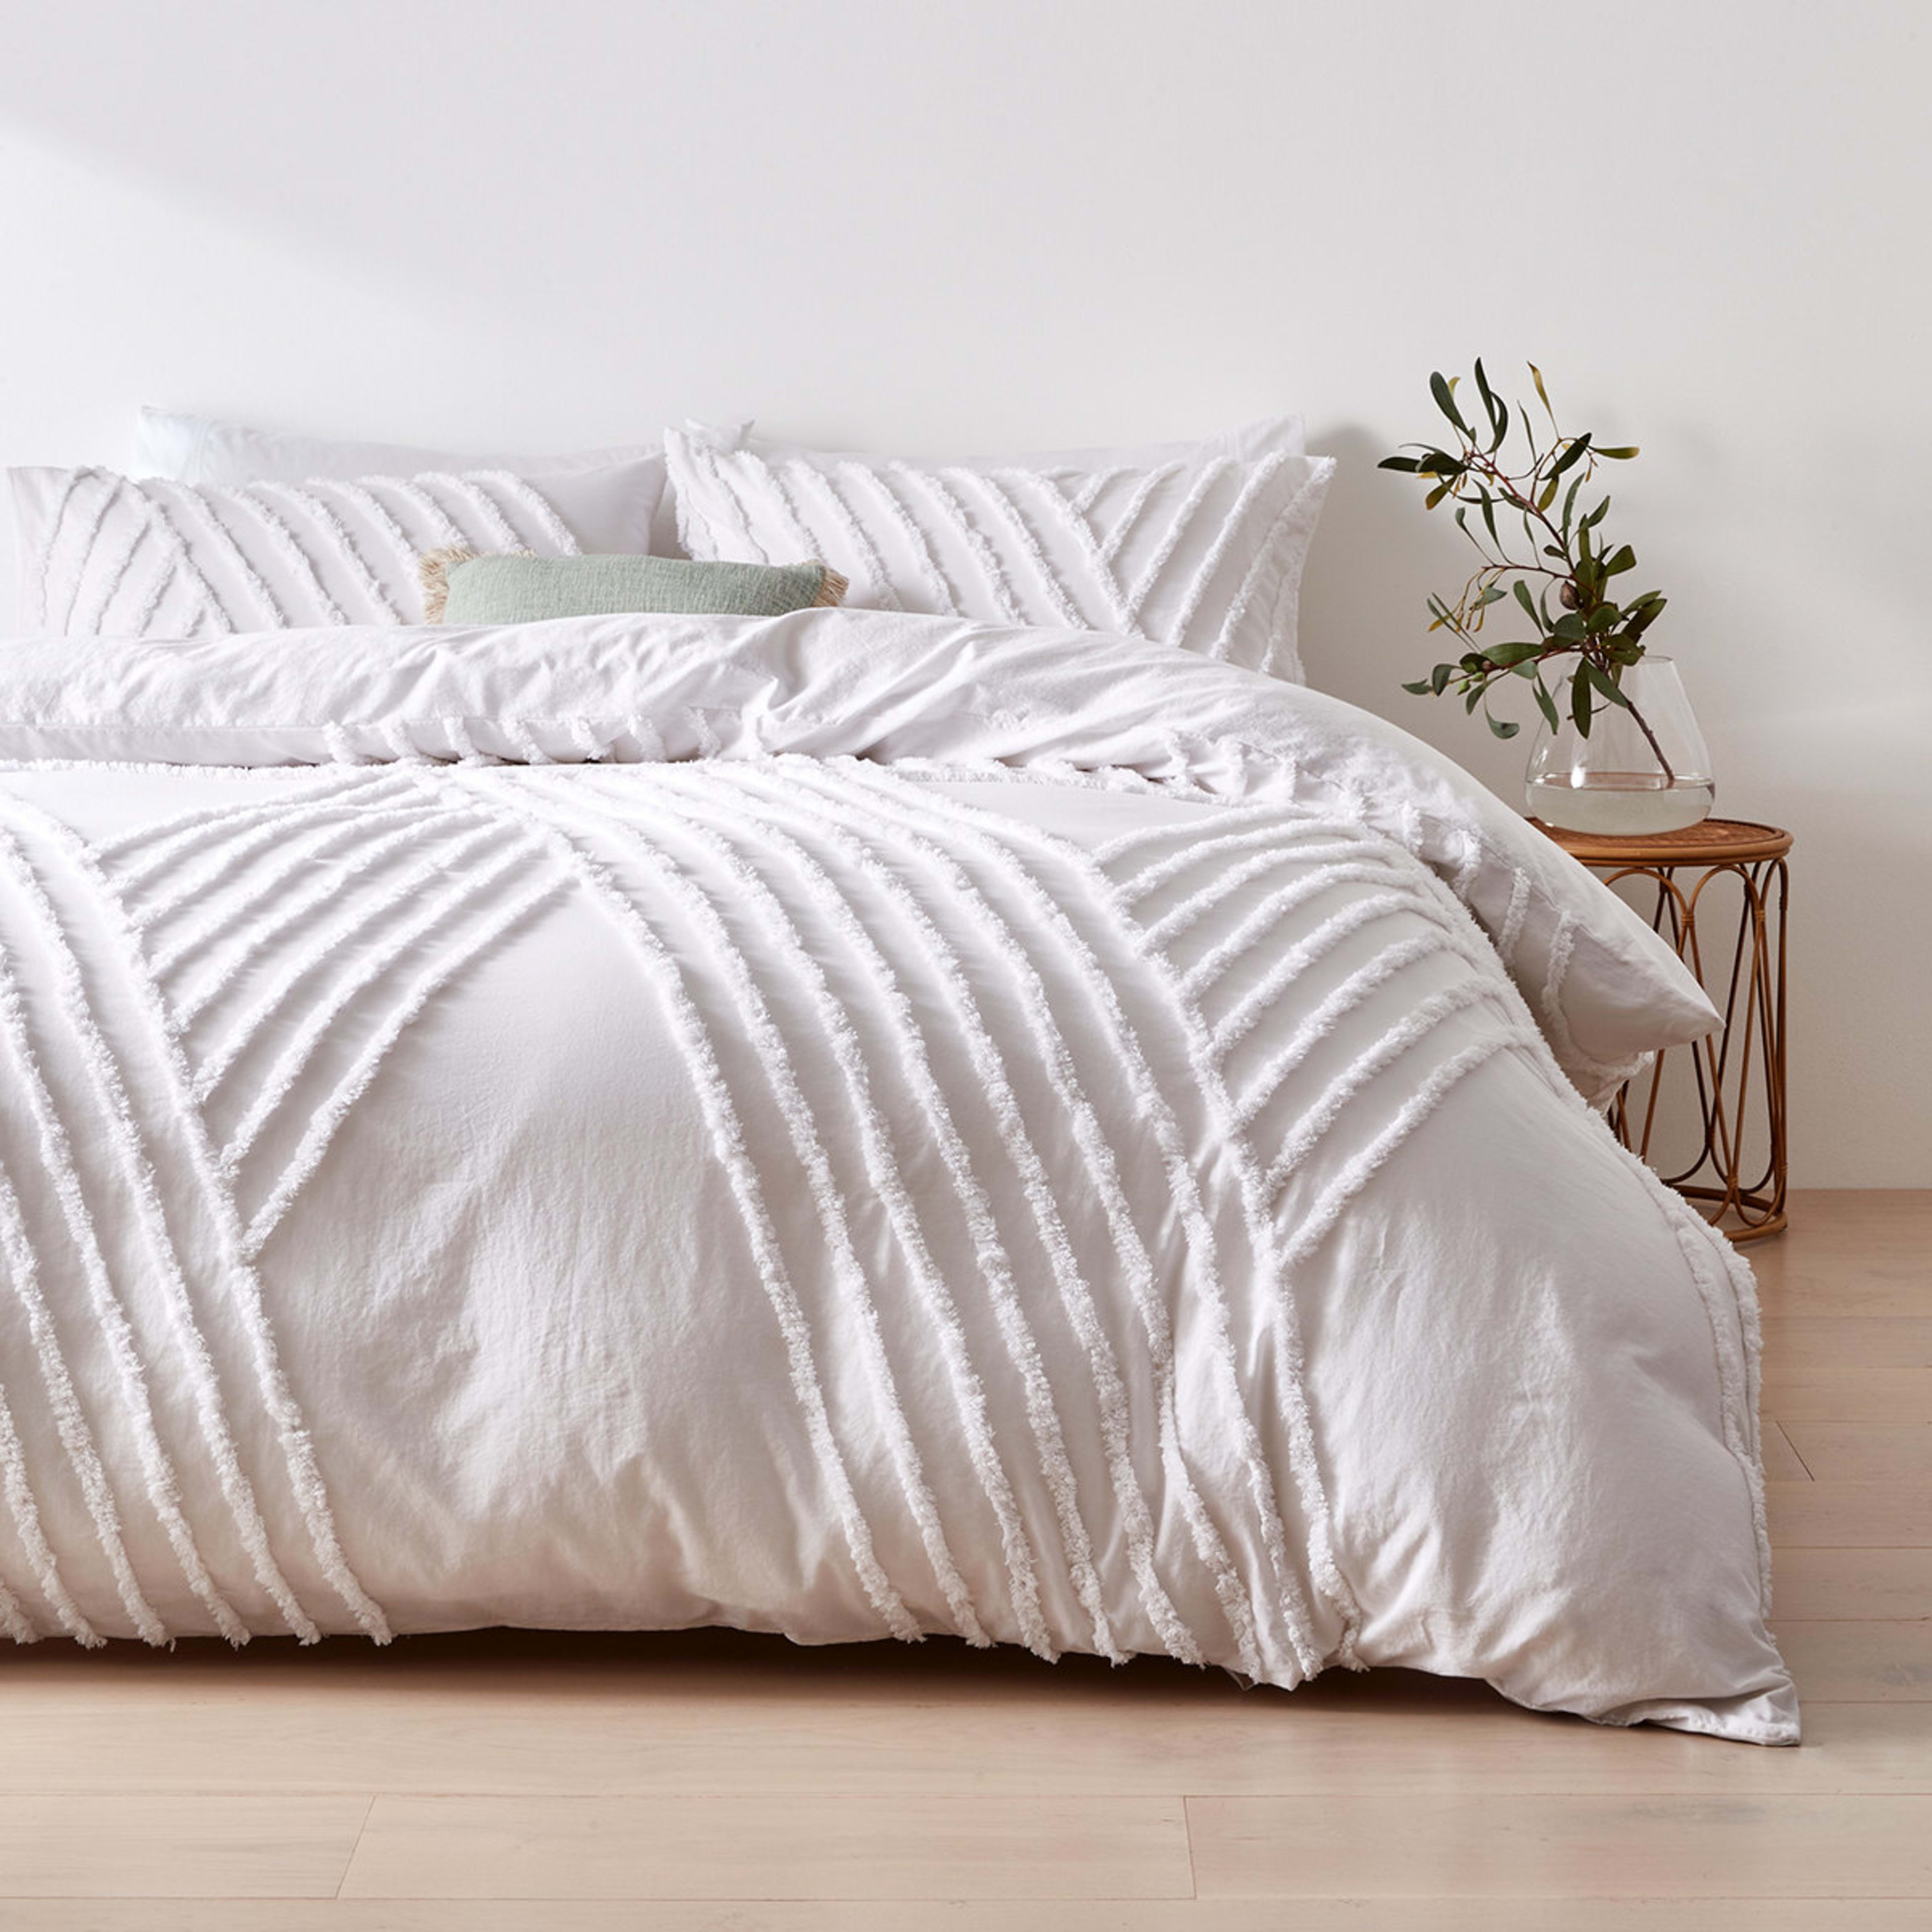 Tarni Cotton Quilt Cover Set - Queen Bed, White